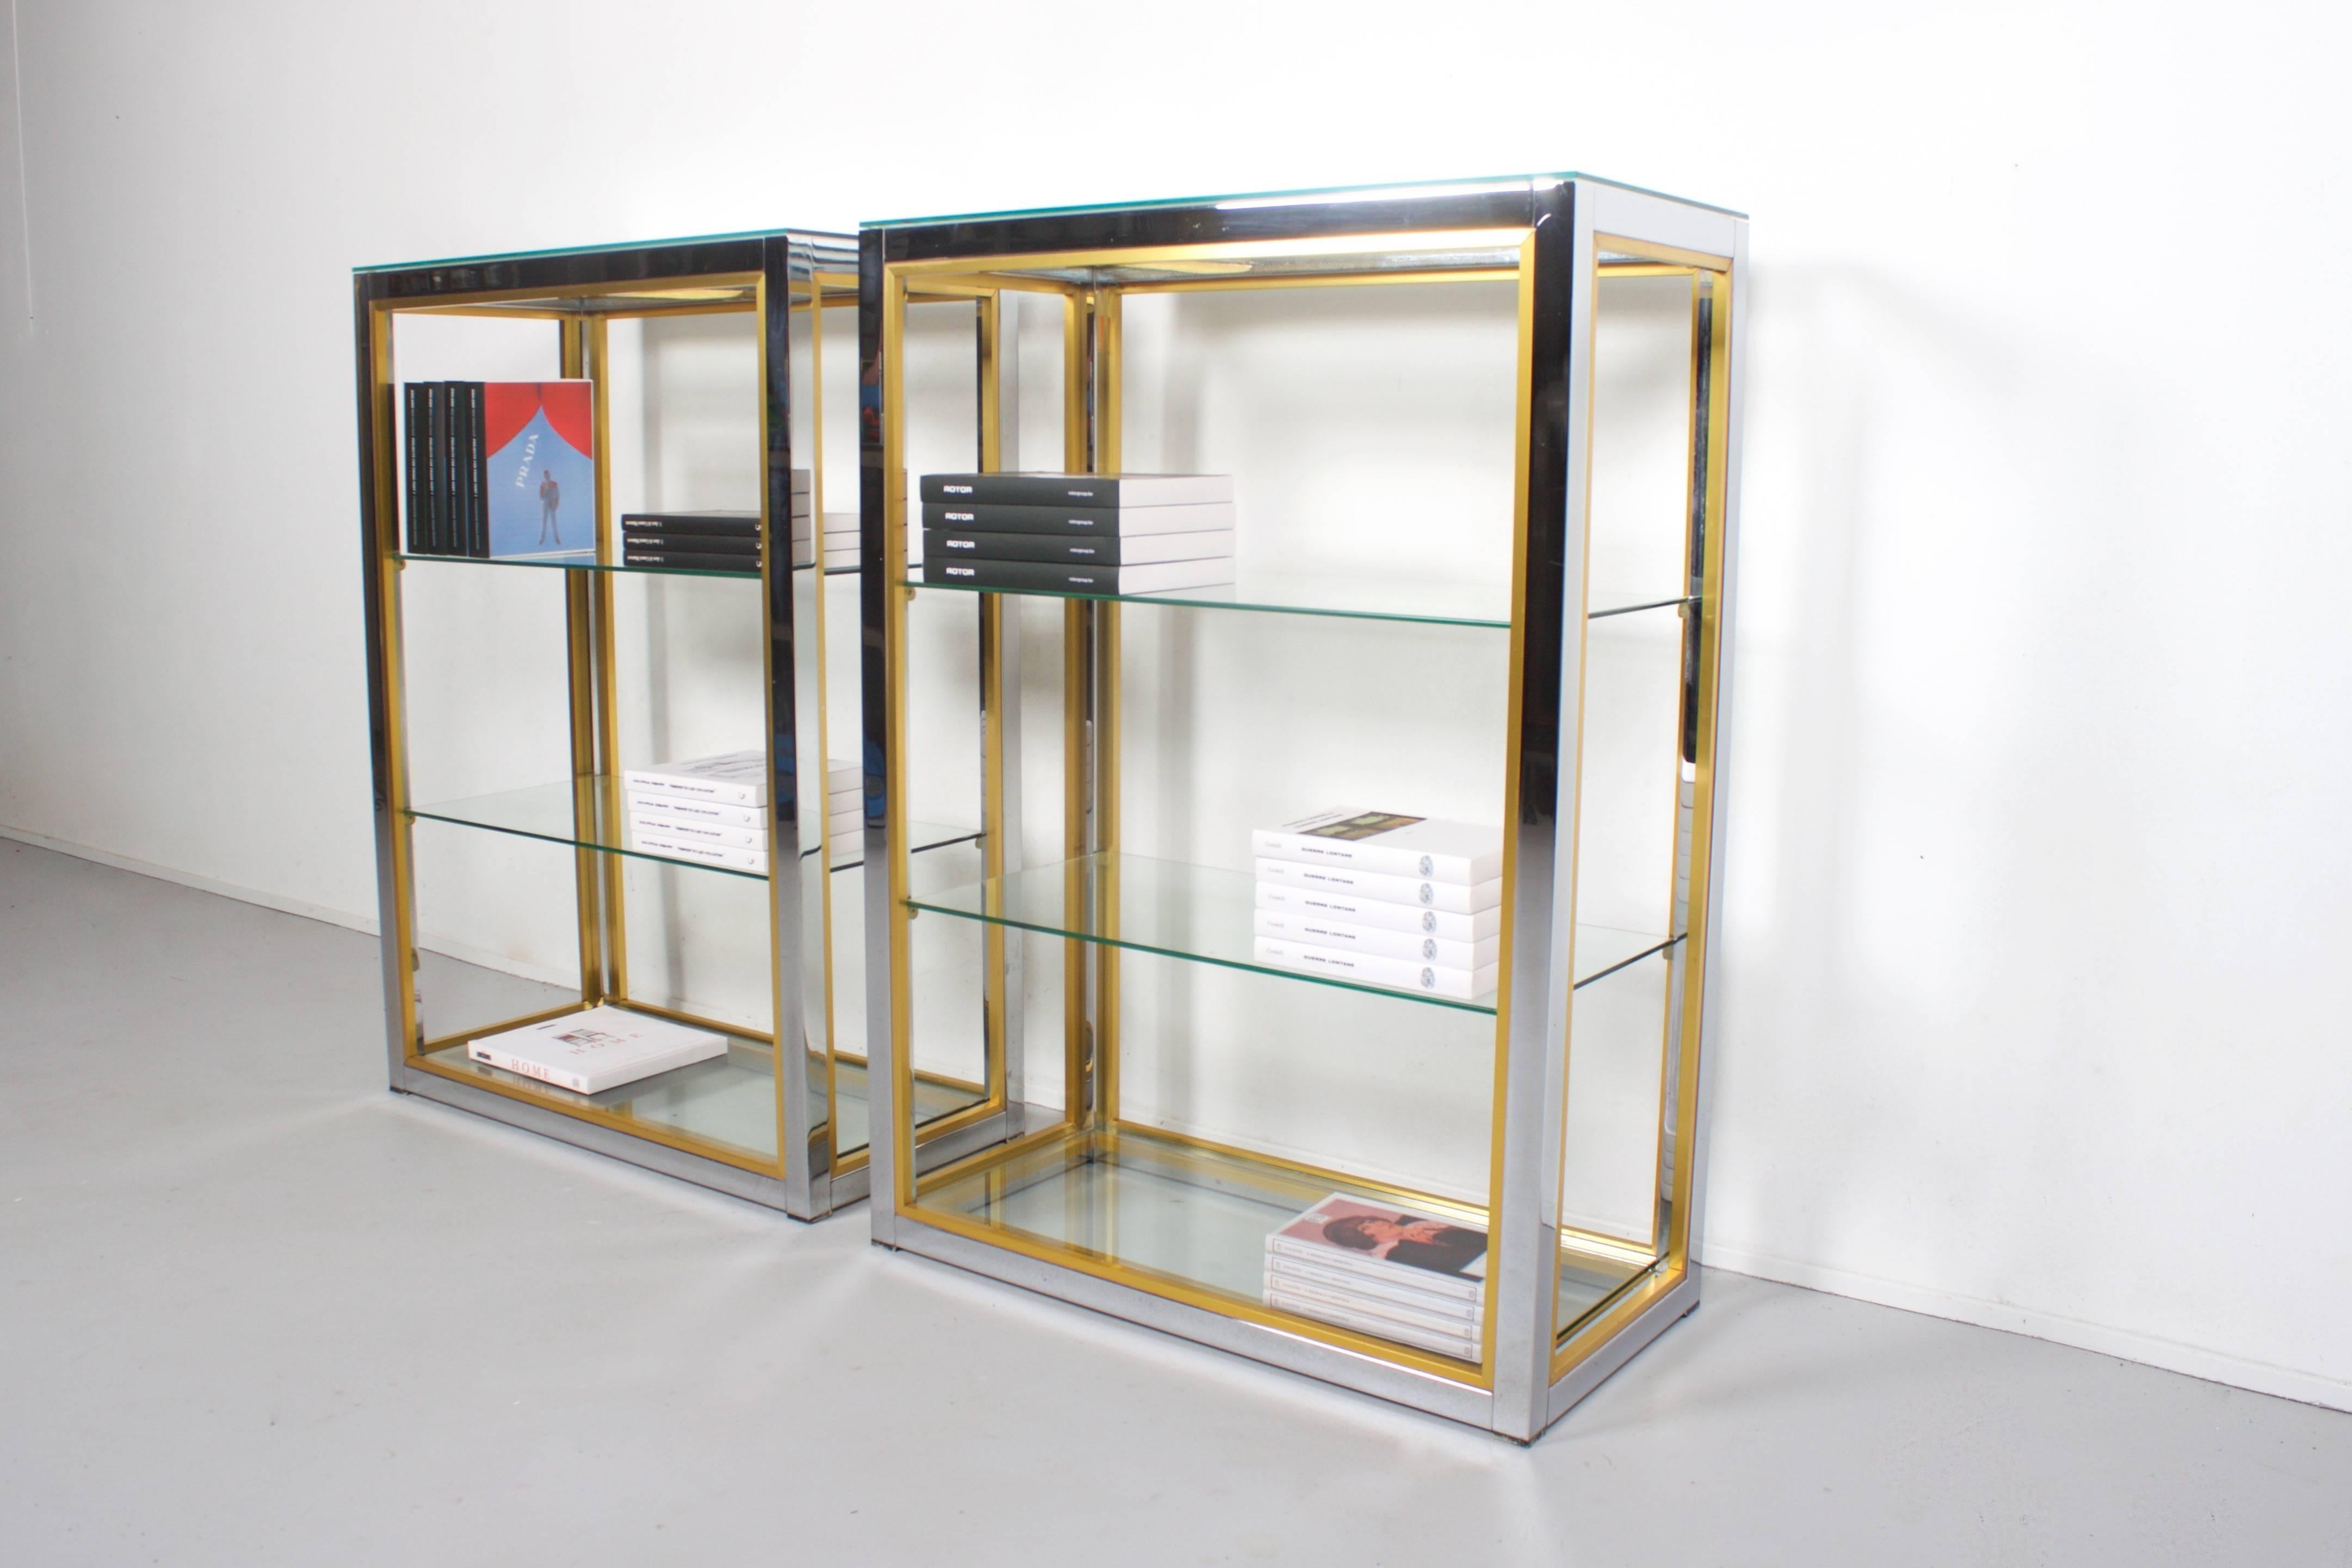 Two étagères by the Italian designer Renato Zevi in very good condition.

Chrome structure with contrasting brass details.

Four glass shelves of which one is situated at the base.

Can also be used as a room divider. 

If you have any